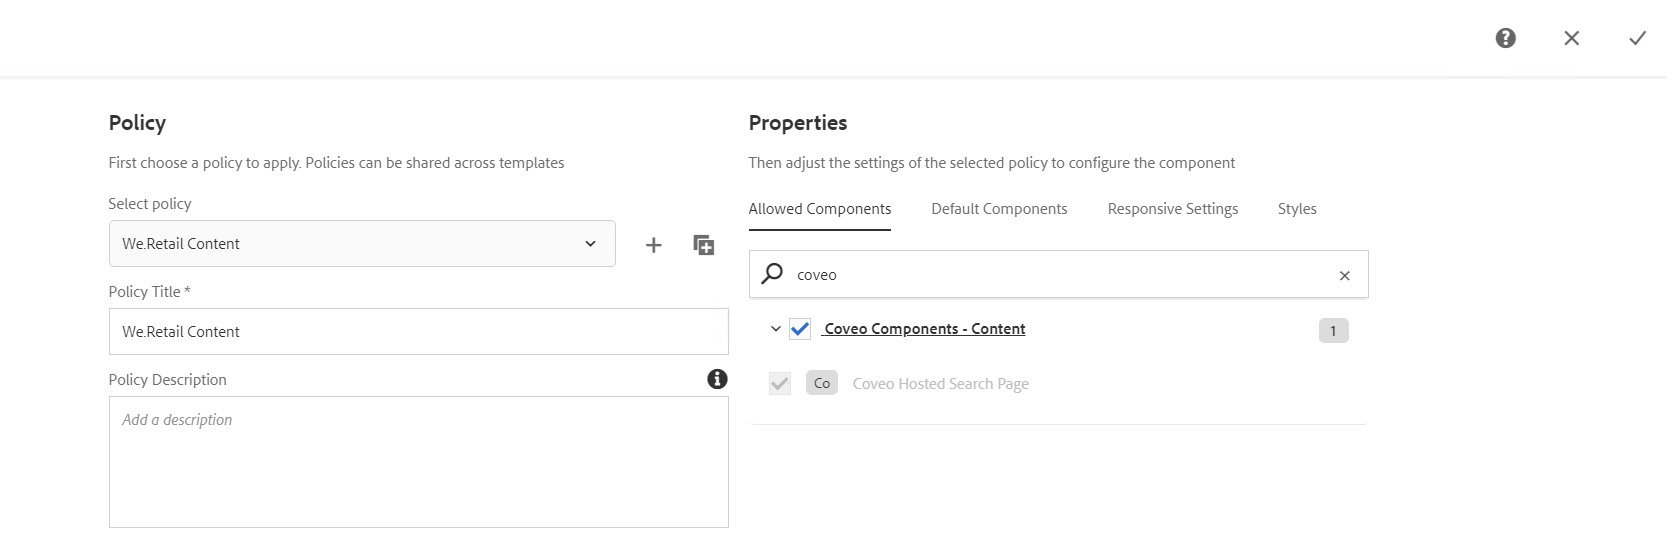 Adding Coveo Hosted Search Page component as allowed component